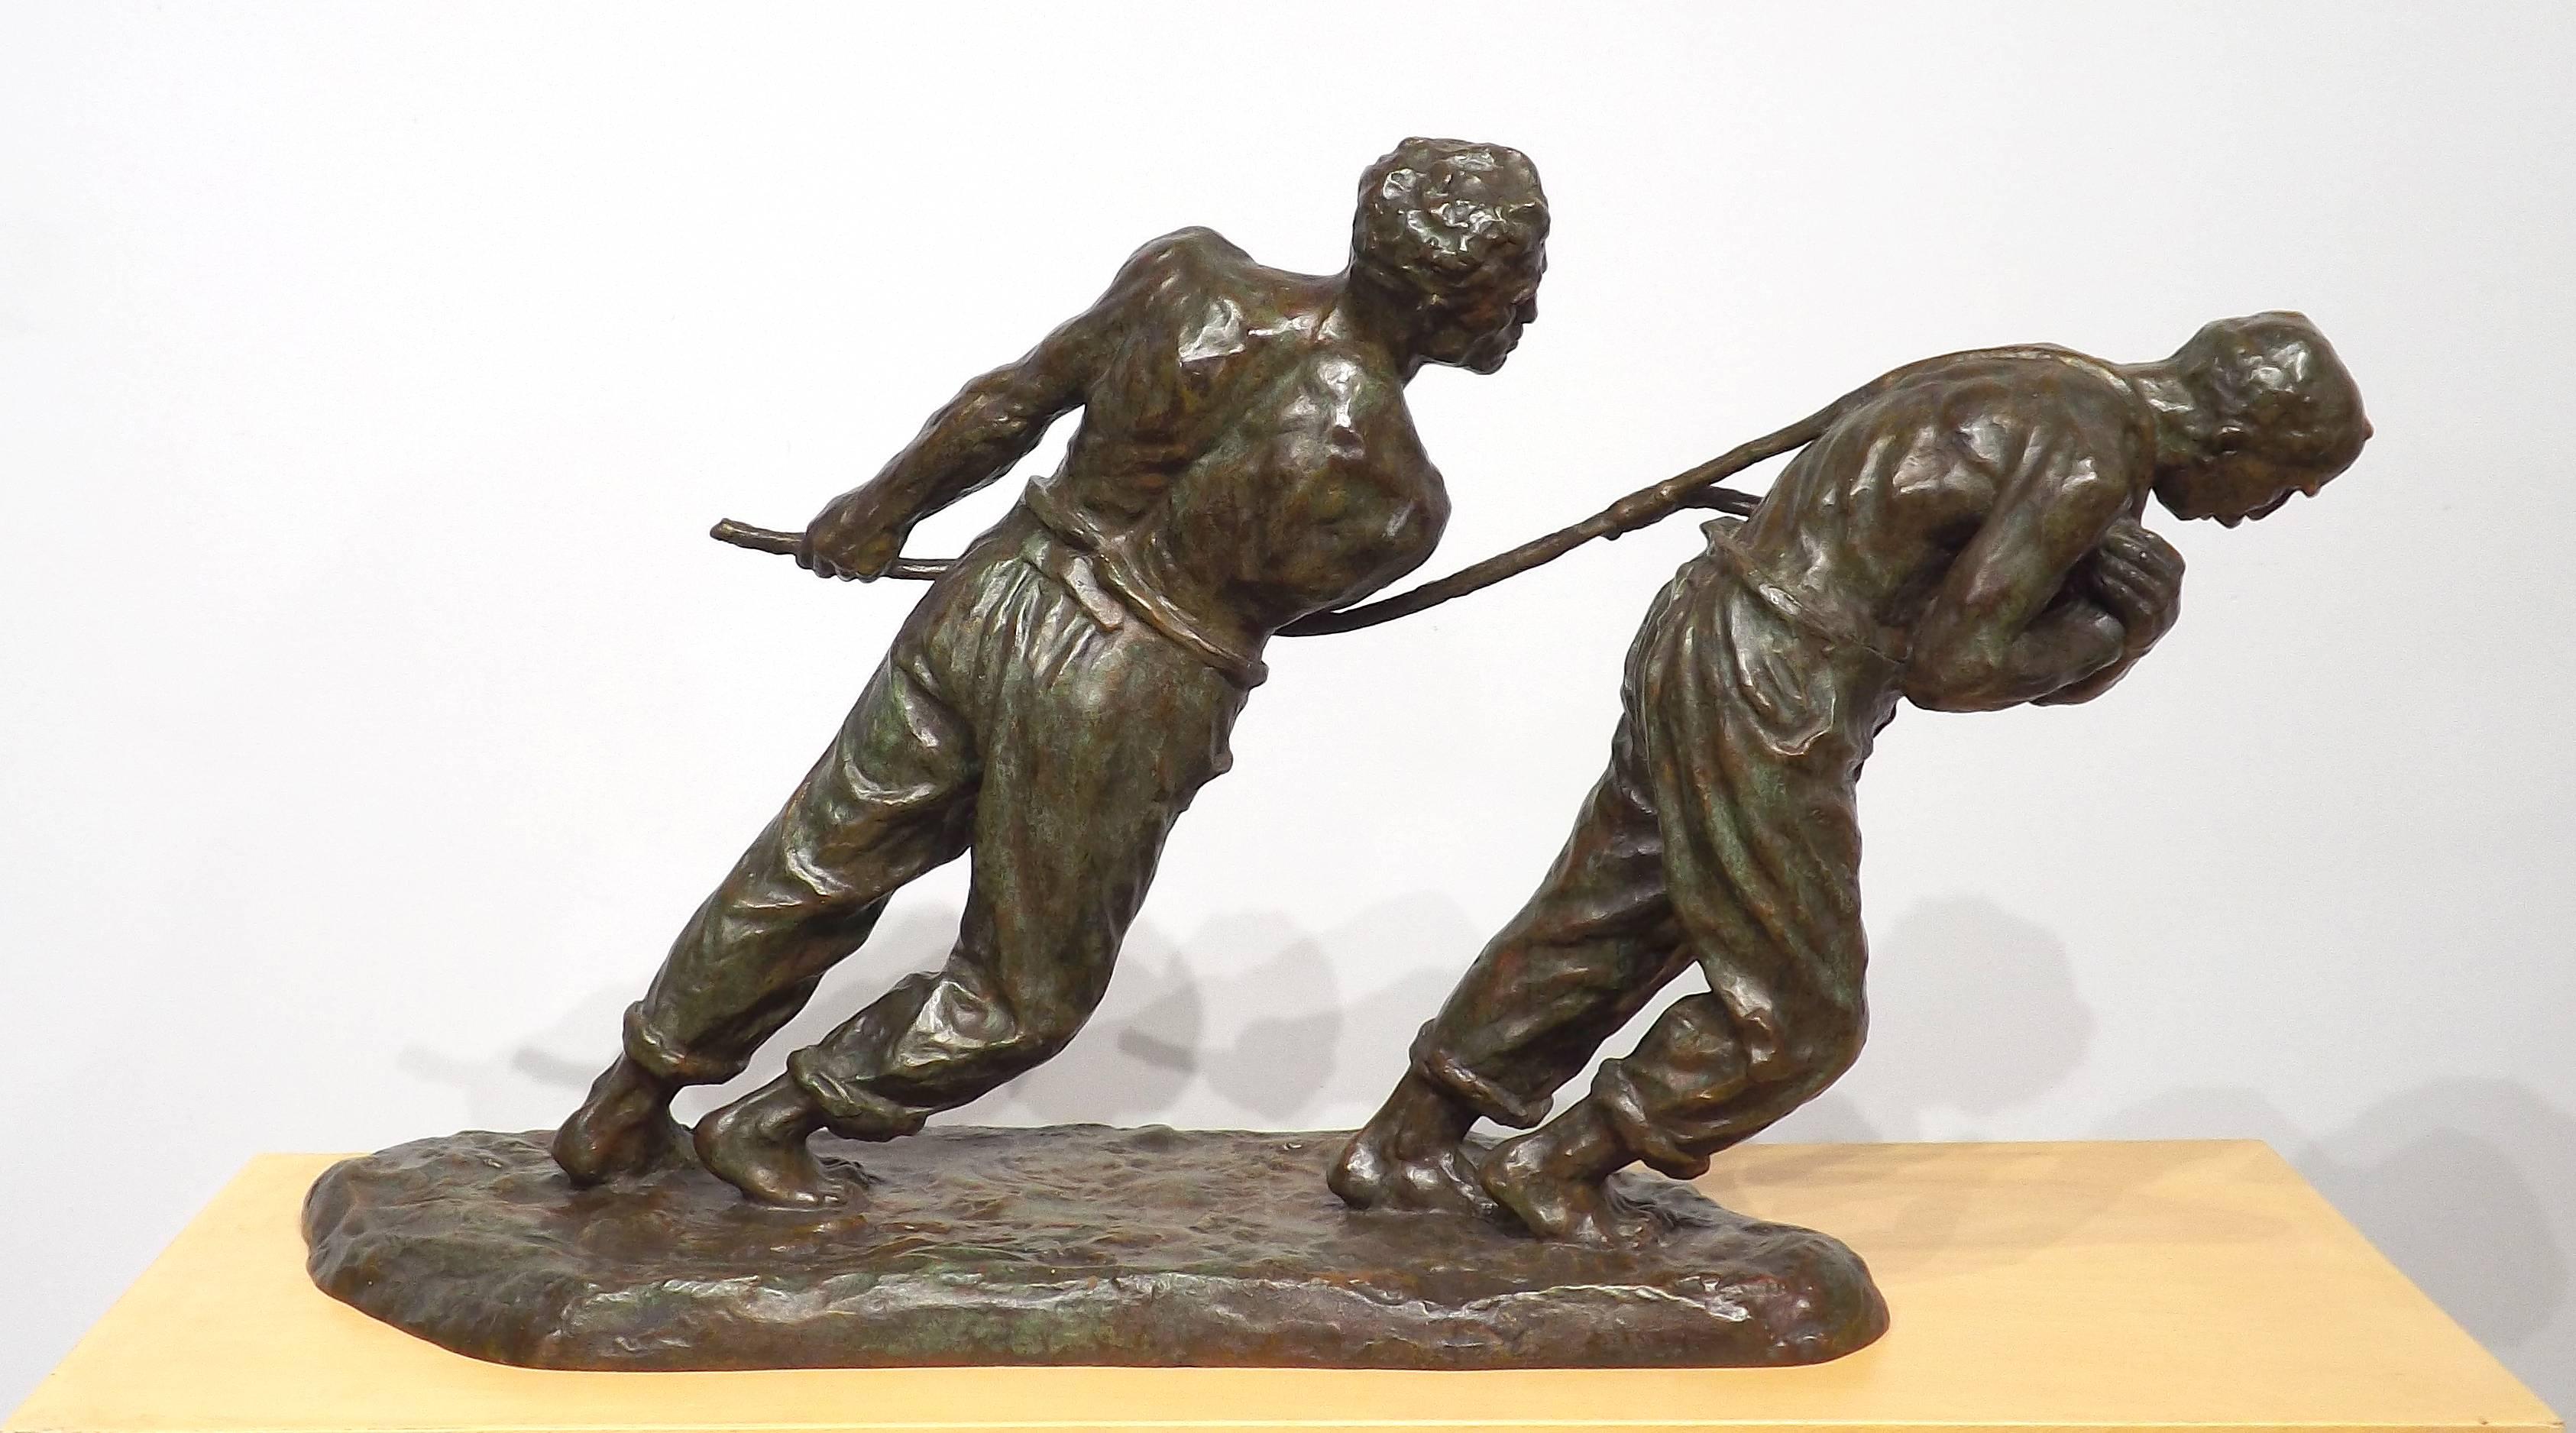 A powerful bronze of two bare-chested men struggling with an unseen weight, bare feet planted in muddy ground and a grim look of determination on their faces. The unseen weight is most likely a loaded river barge.

Born in Belgium,